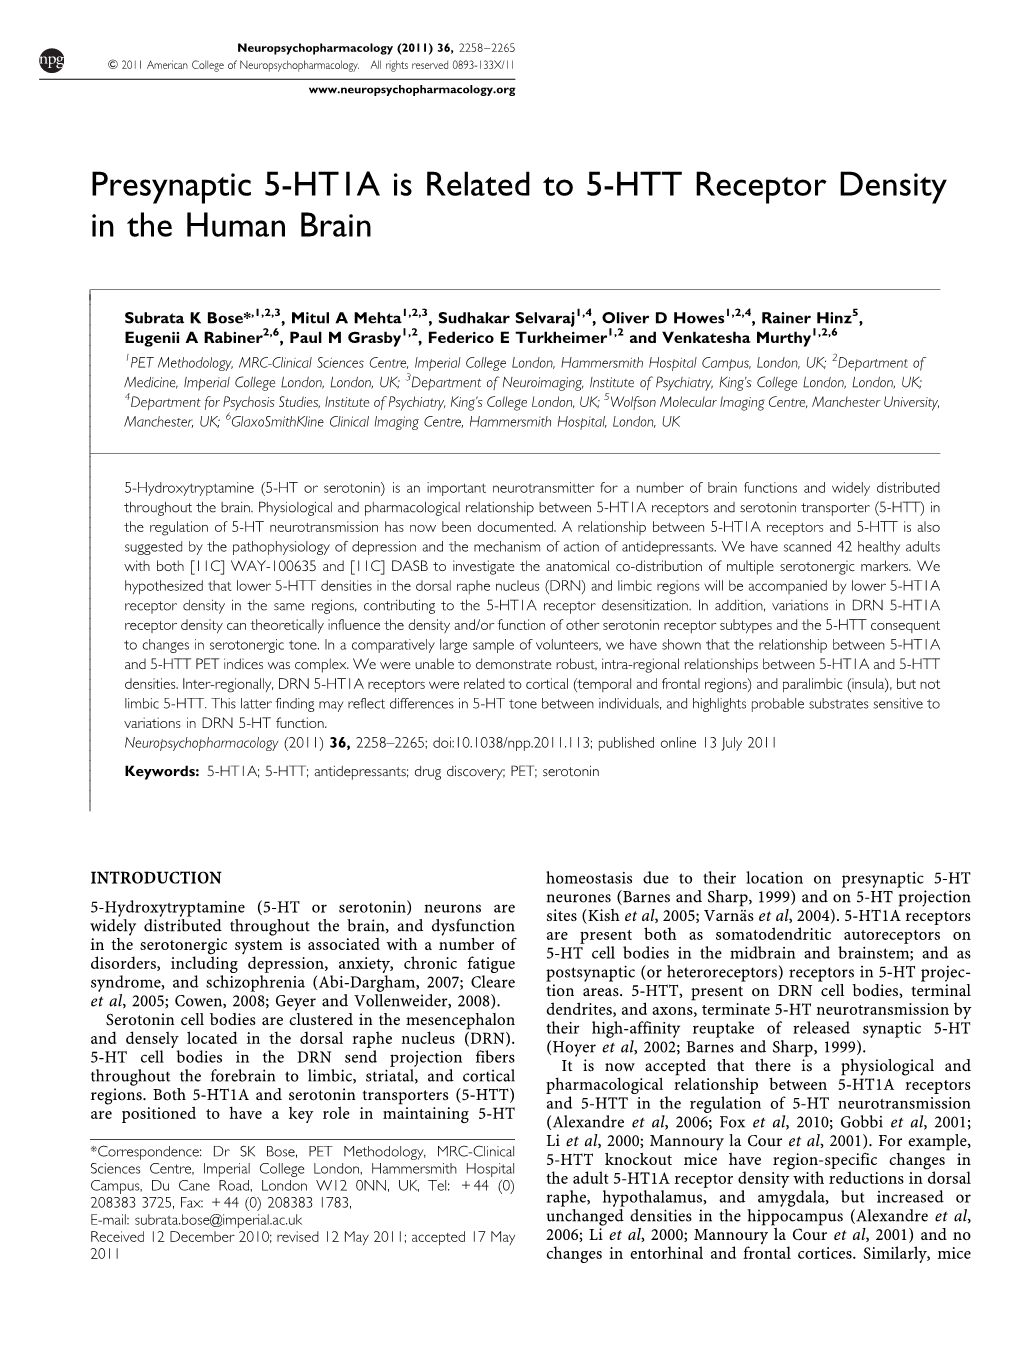 Presynaptic 5-HT1A Is Related to 5-HTT Receptor Density in the Human Brain